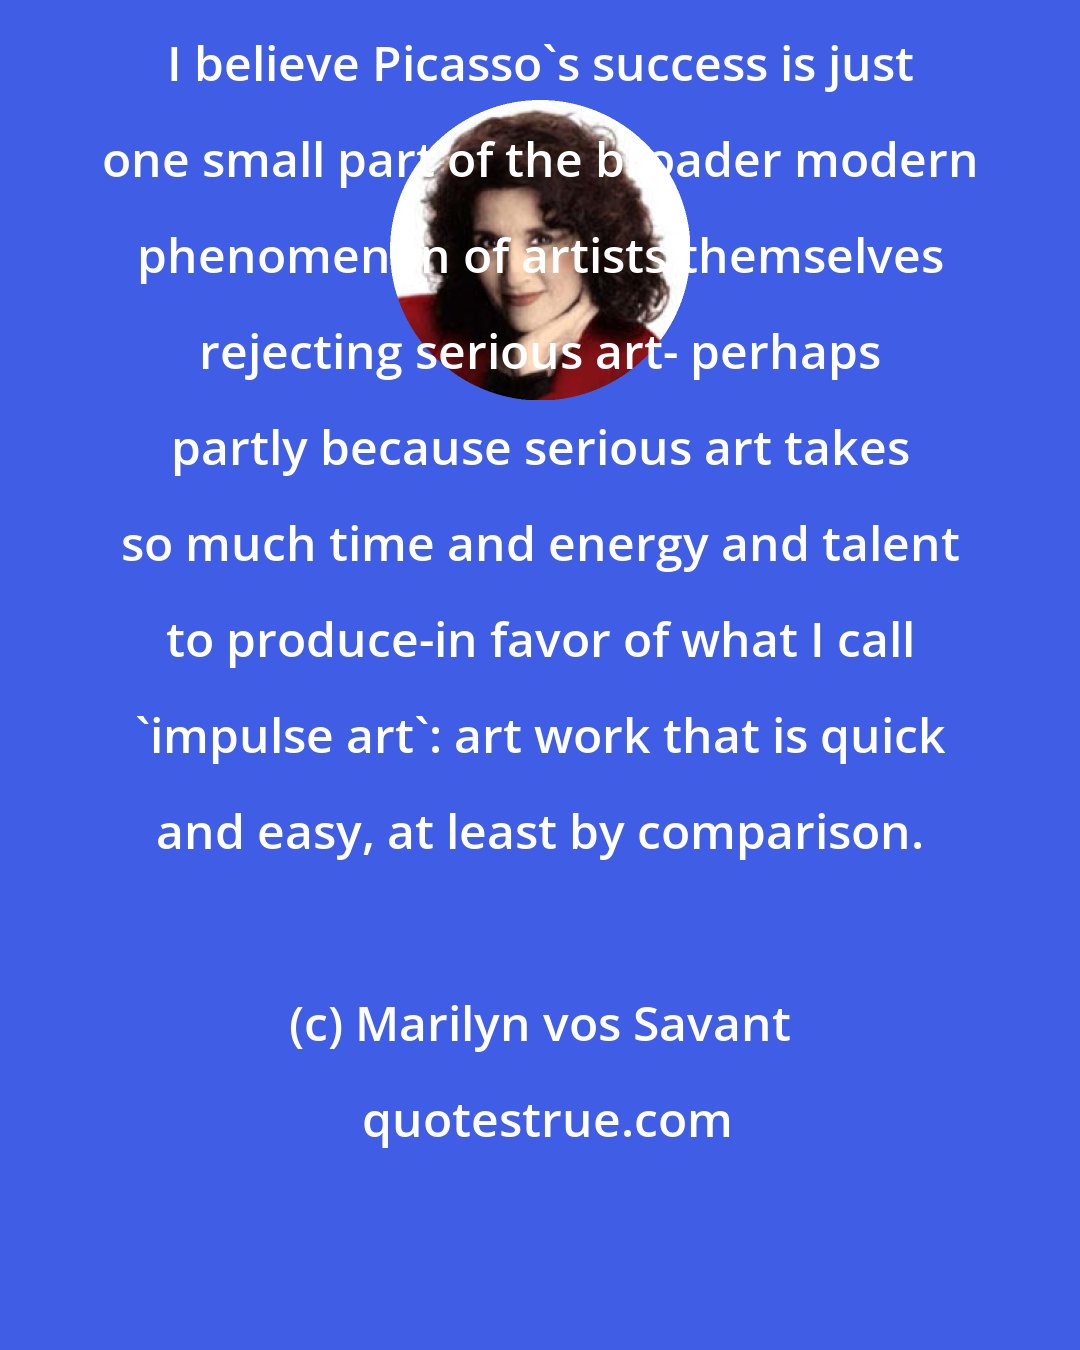 Marilyn vos Savant: I believe Picasso's success is just one small part of the broader modern phenomenon of artists themselves rejecting serious art- perhaps partly because serious art takes so much time and energy and talent to produce-in favor of what I call `impulse art': art work that is quick and easy, at least by comparison.